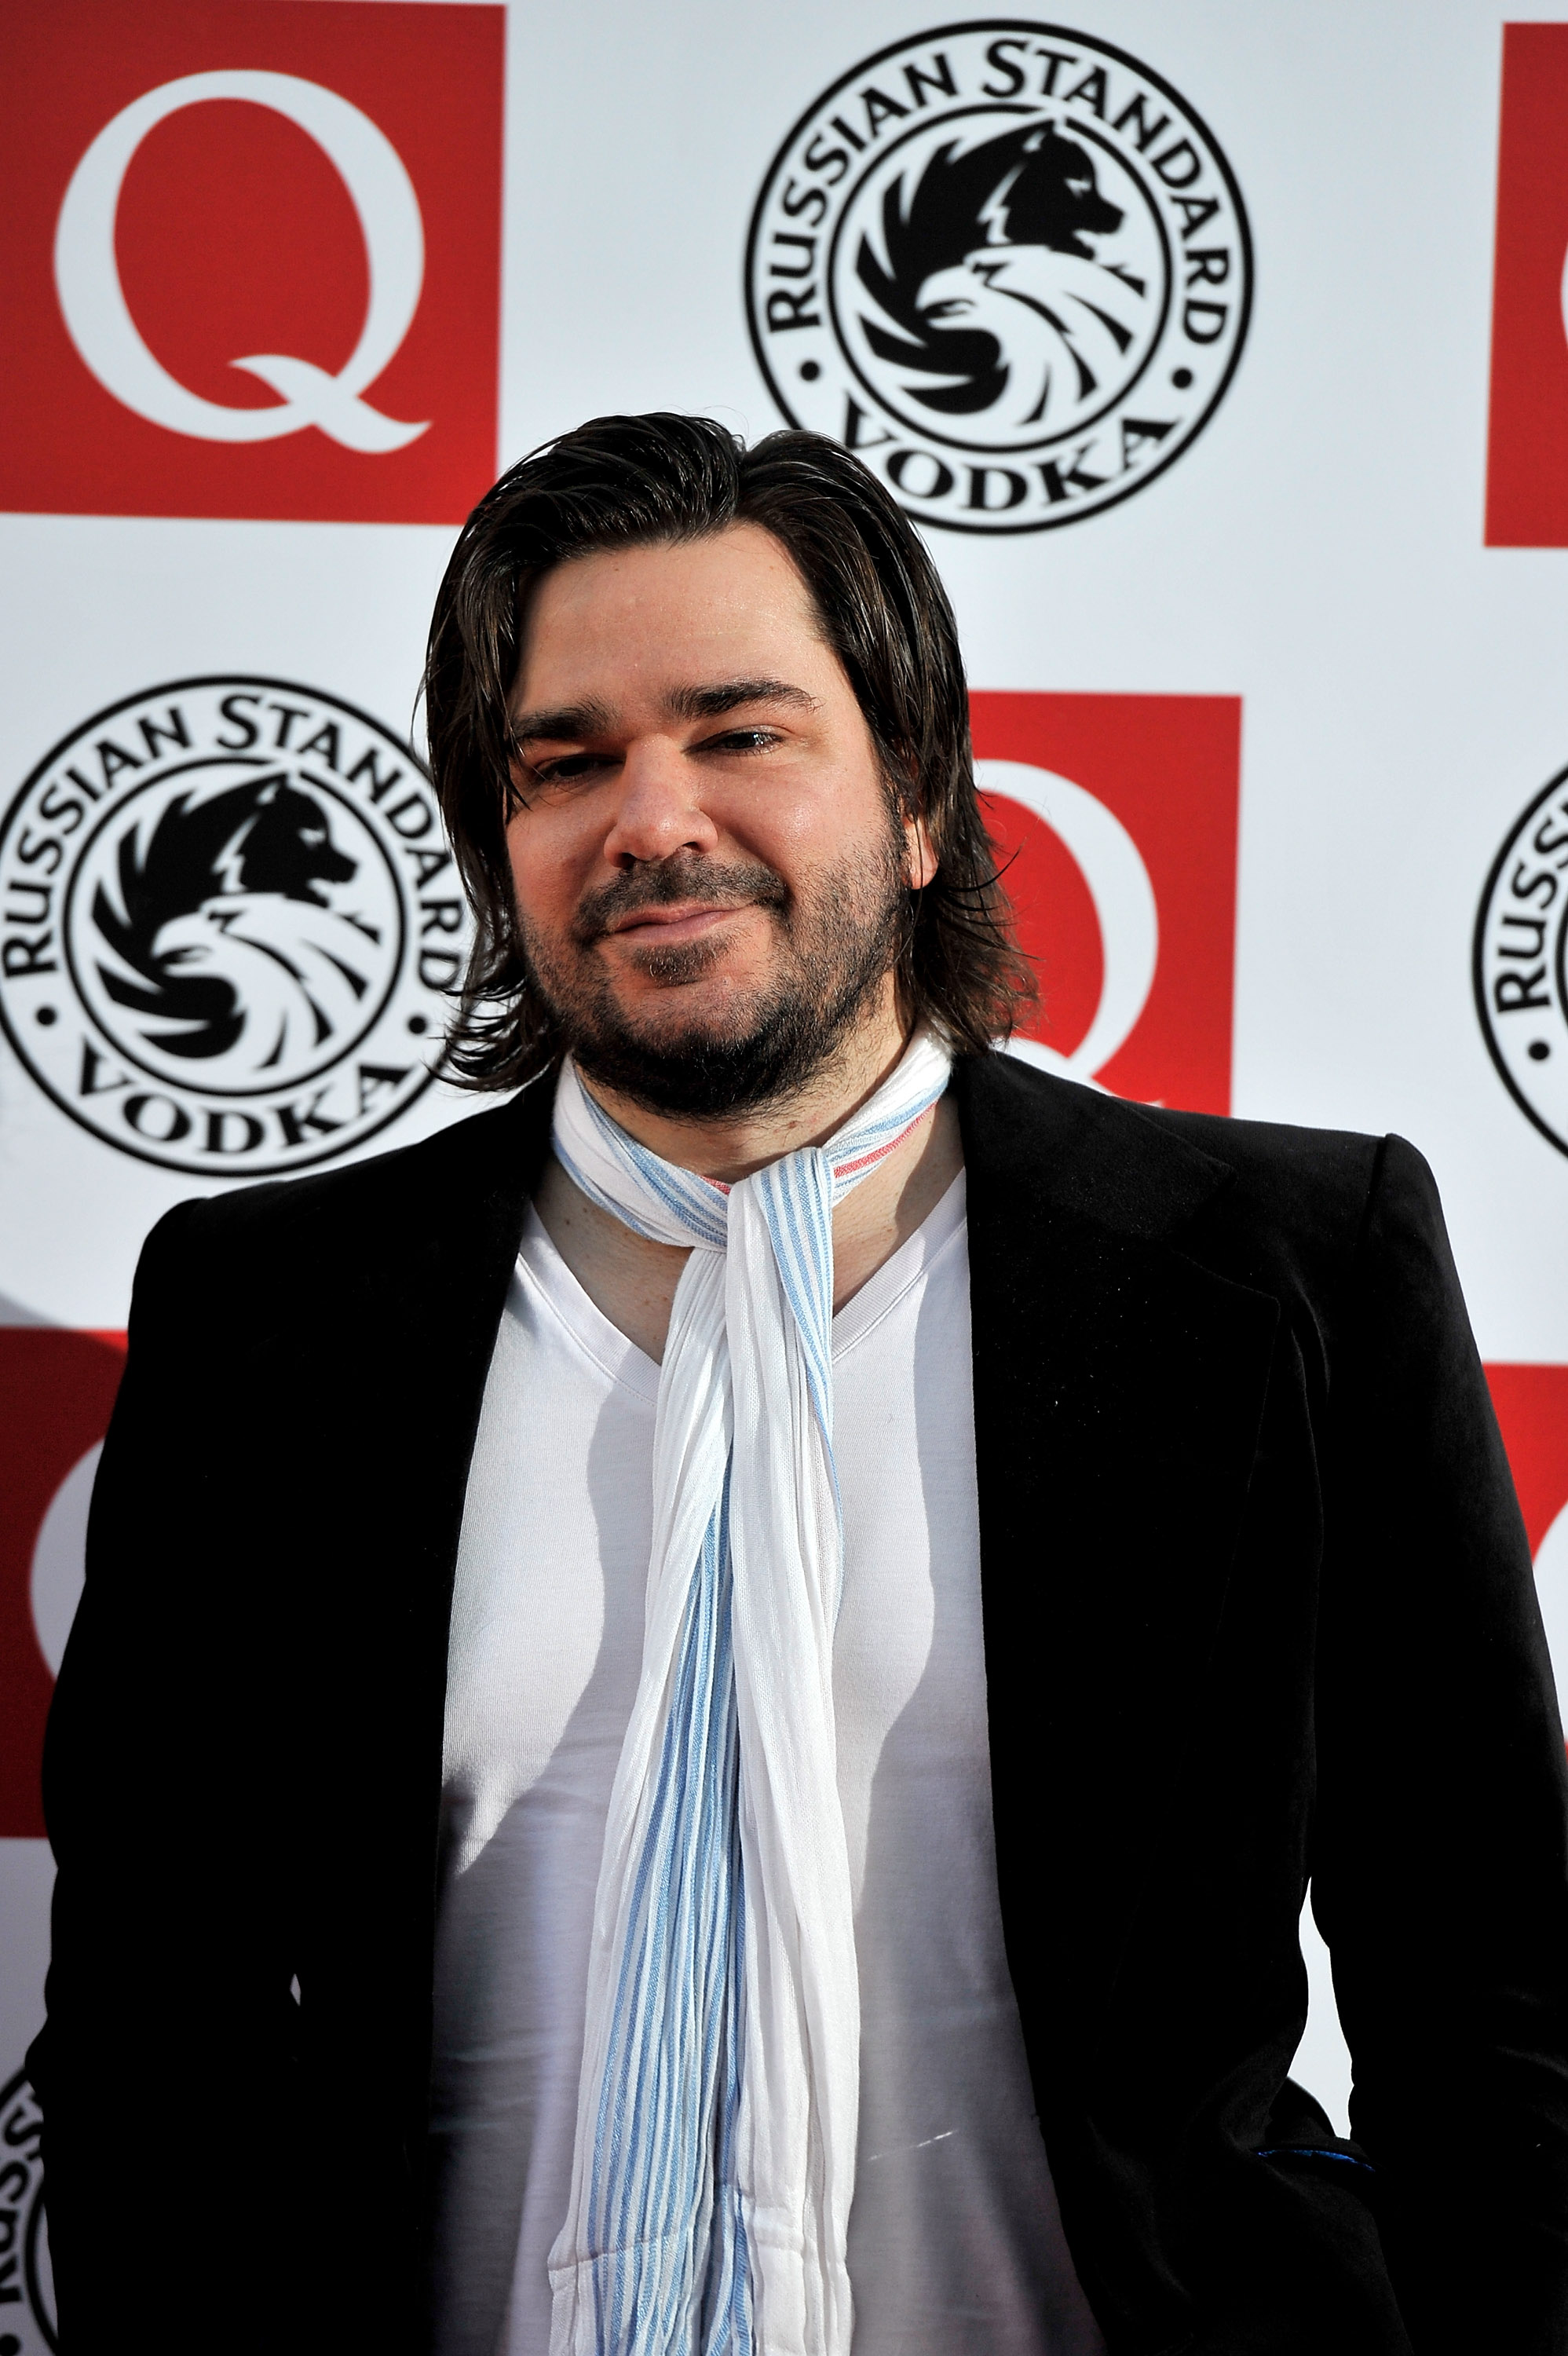 Matt Berry at the Q Awards 2010 on October 25, 2010, in London, England. | Source: Getty Images